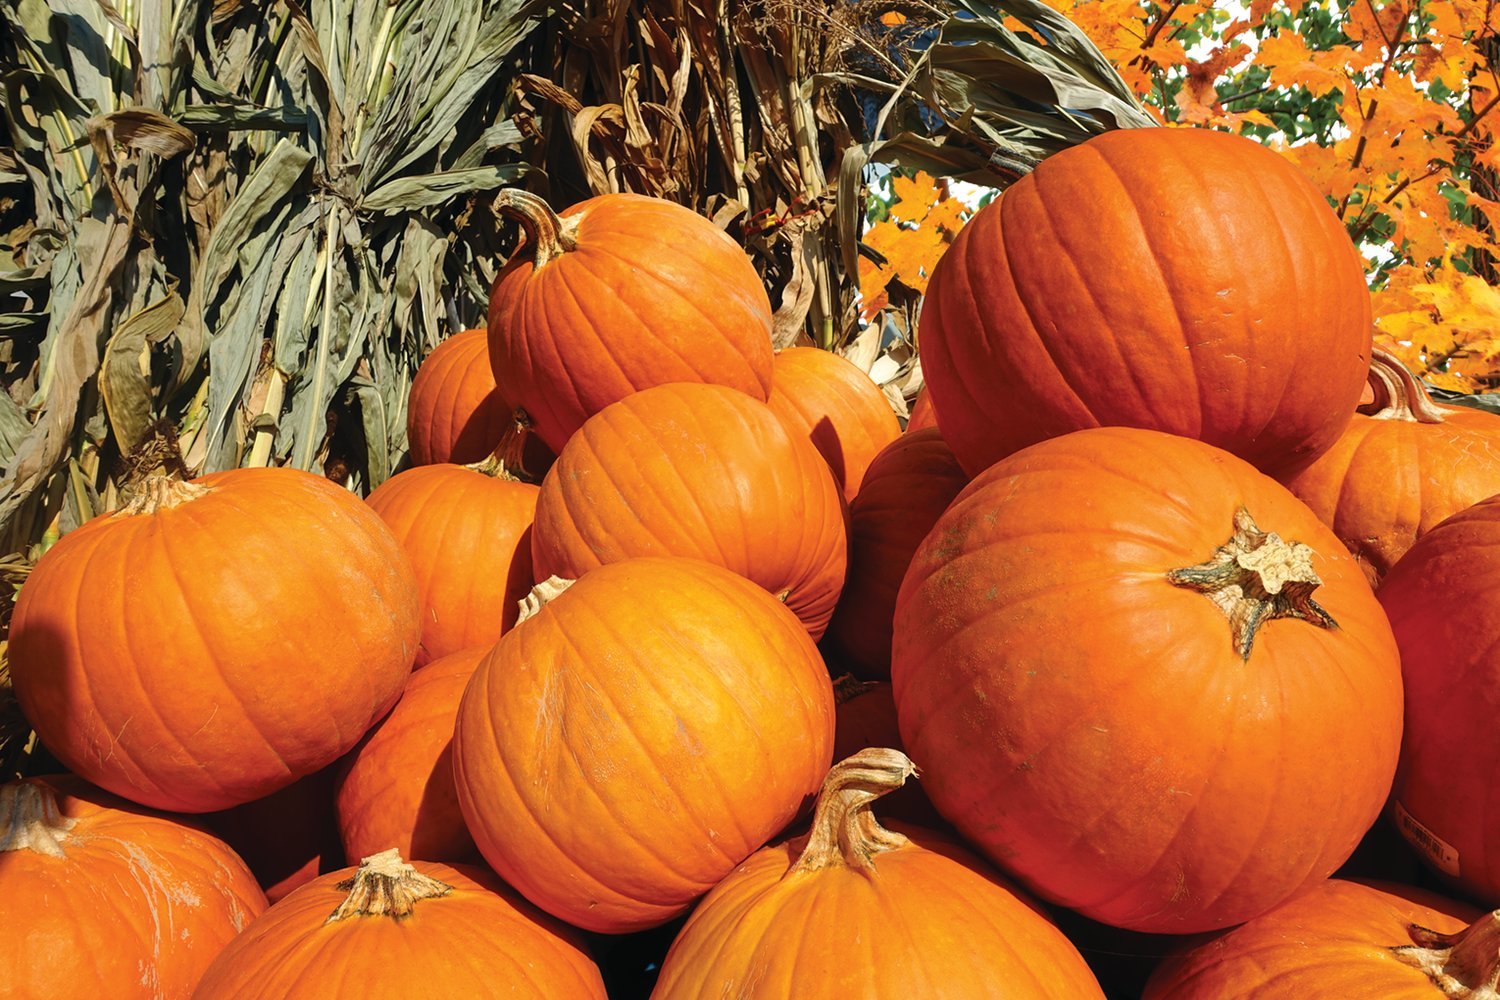 Pumpkin is the easiest vegetable to grow, even for a beginner gardener. It is a tender vegetable meaning the seeds won’t germinate well in cold soil; you don’t want to plant too early in the spring.